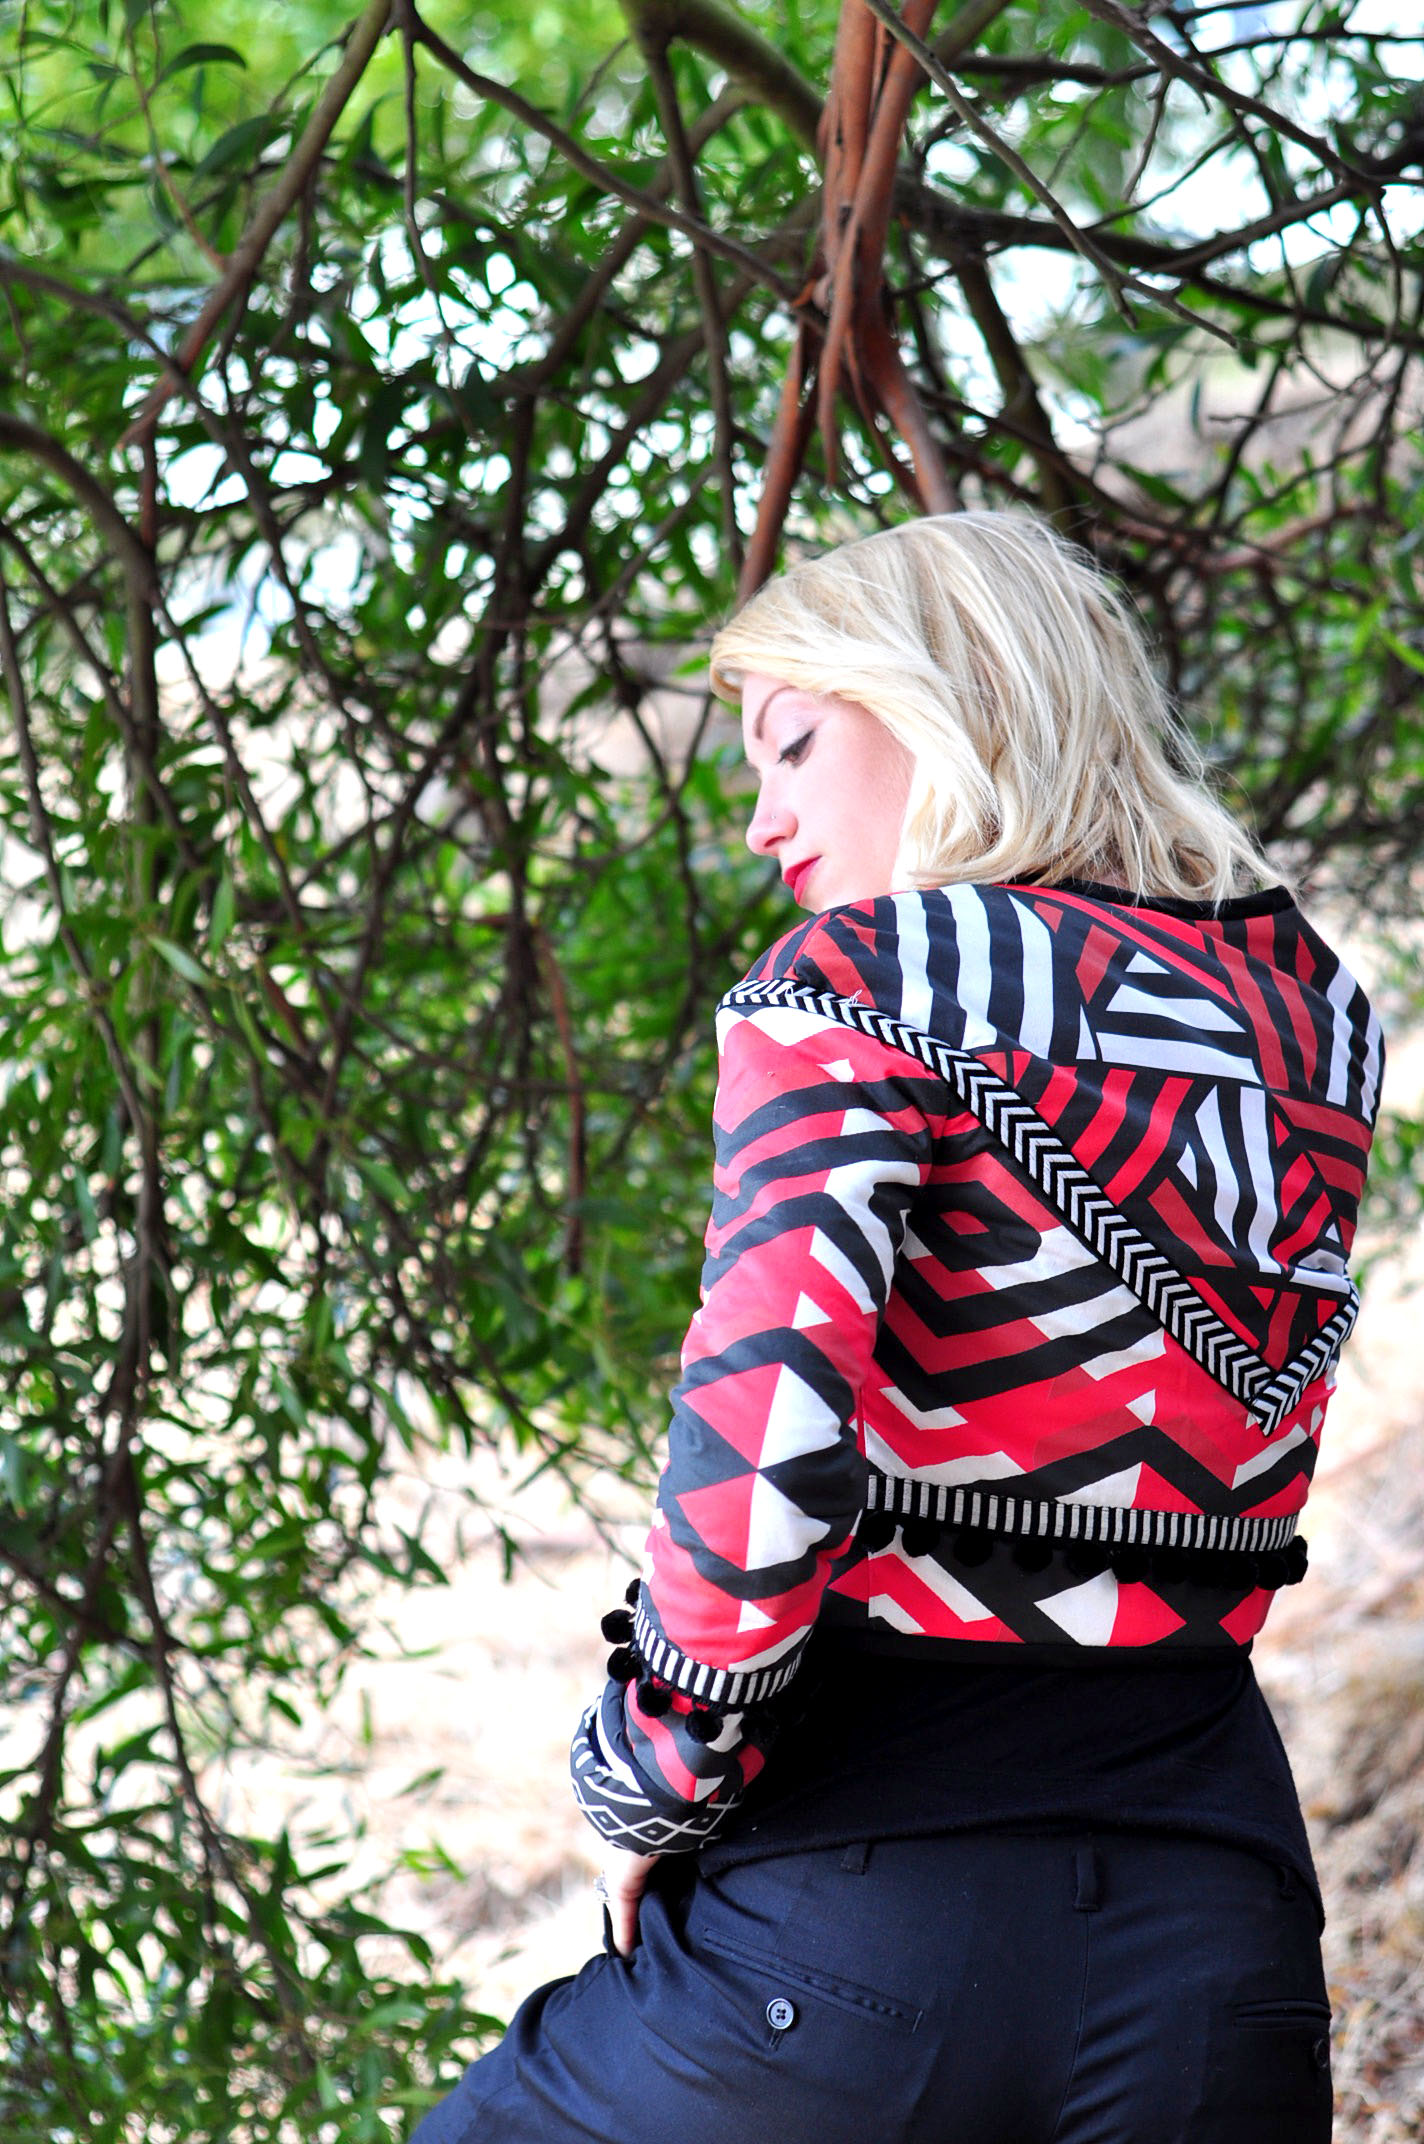 red black tribal print quilted jacket, handmade by Stefanie, fabric by The Style Safari on Spoonflower